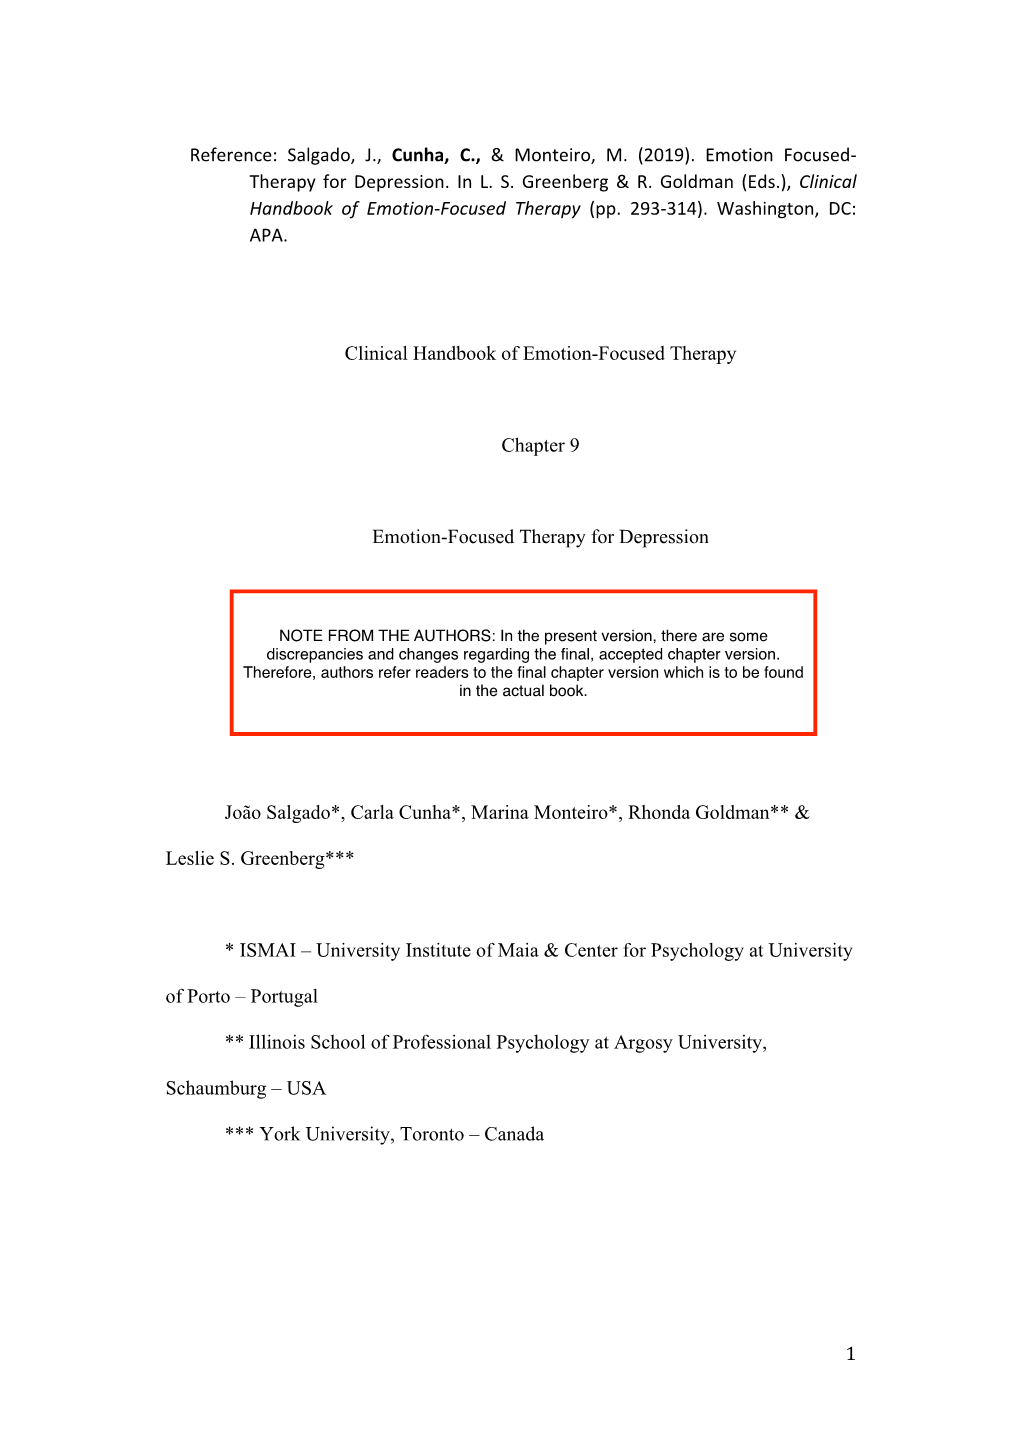 Salgado,Cunha&Monteiro 2019 Emotion-Focused Therapy Handbook Chapter9ondepression Final Submission